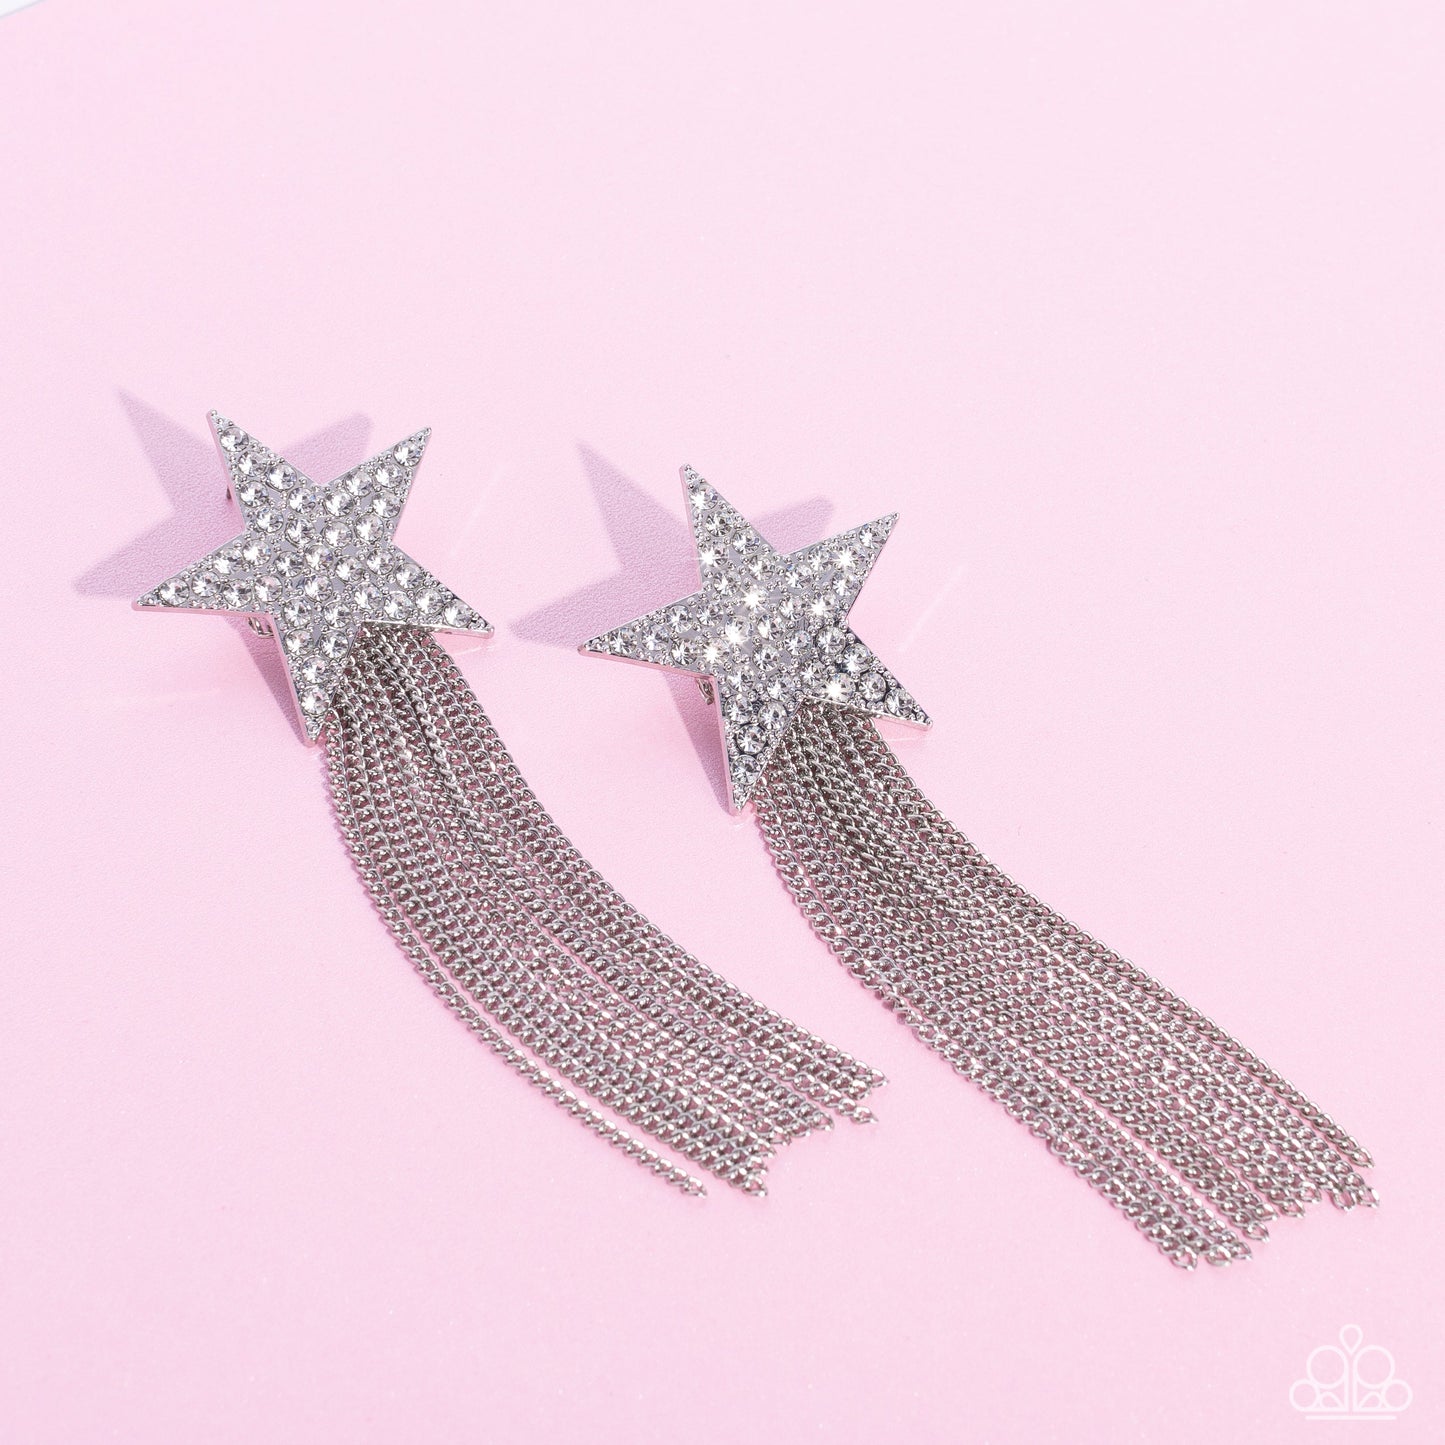 Superstar Solo - White and Silver Earrings - Paparazzi Accessories - Superstar Solo - White and Silver Earrings - Paparazzi Accessories - A curtain of silver chains streams out from the bottom of an oversized silver star encrusted in blinding white rhinestones, resulting in a stellar tassel.